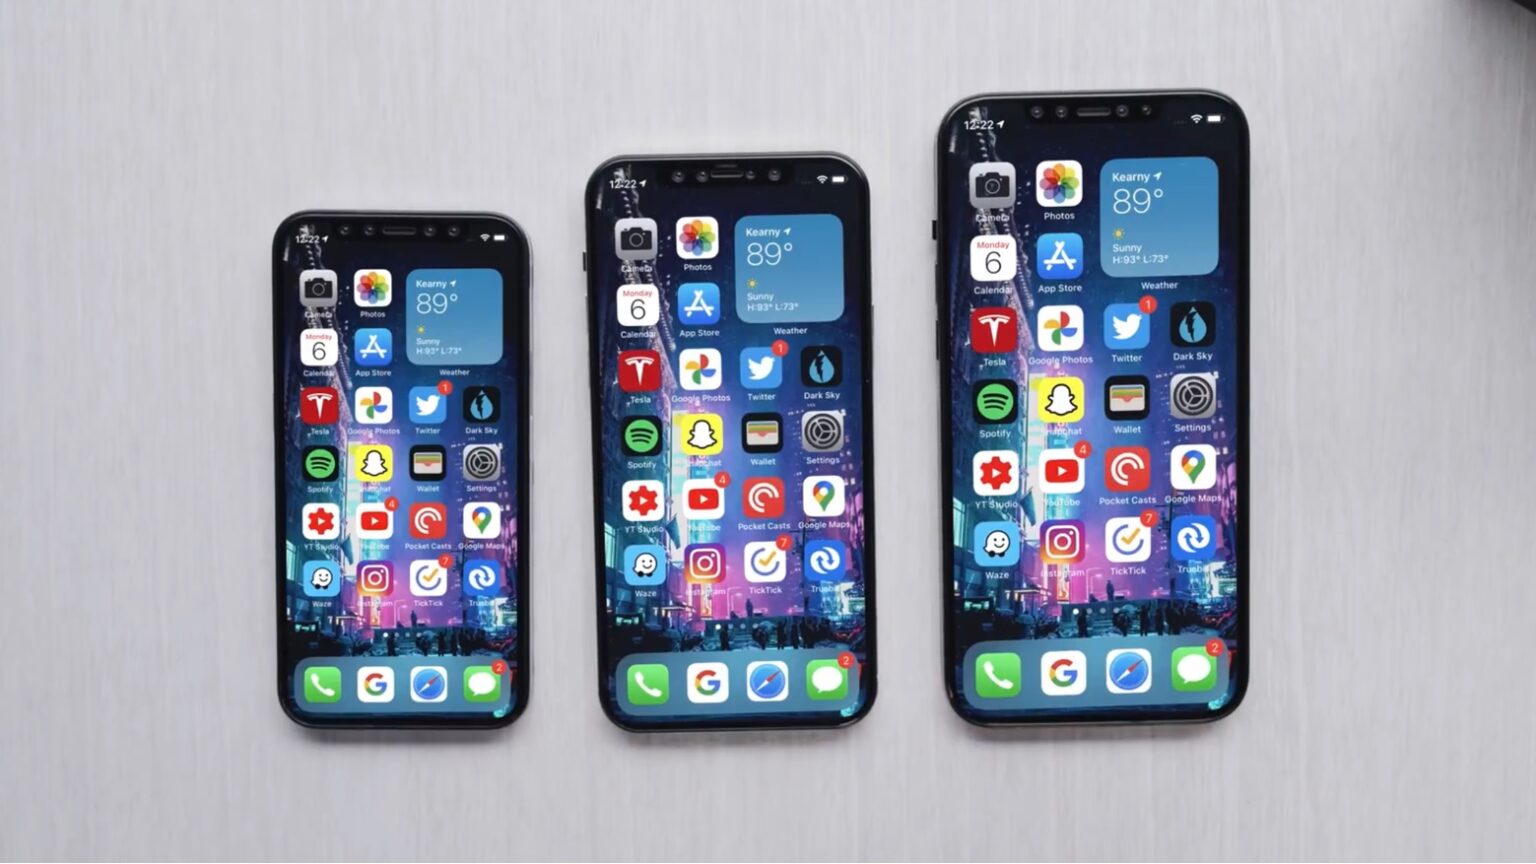 These iPhone 12 dummy units show what the real handset might look like.